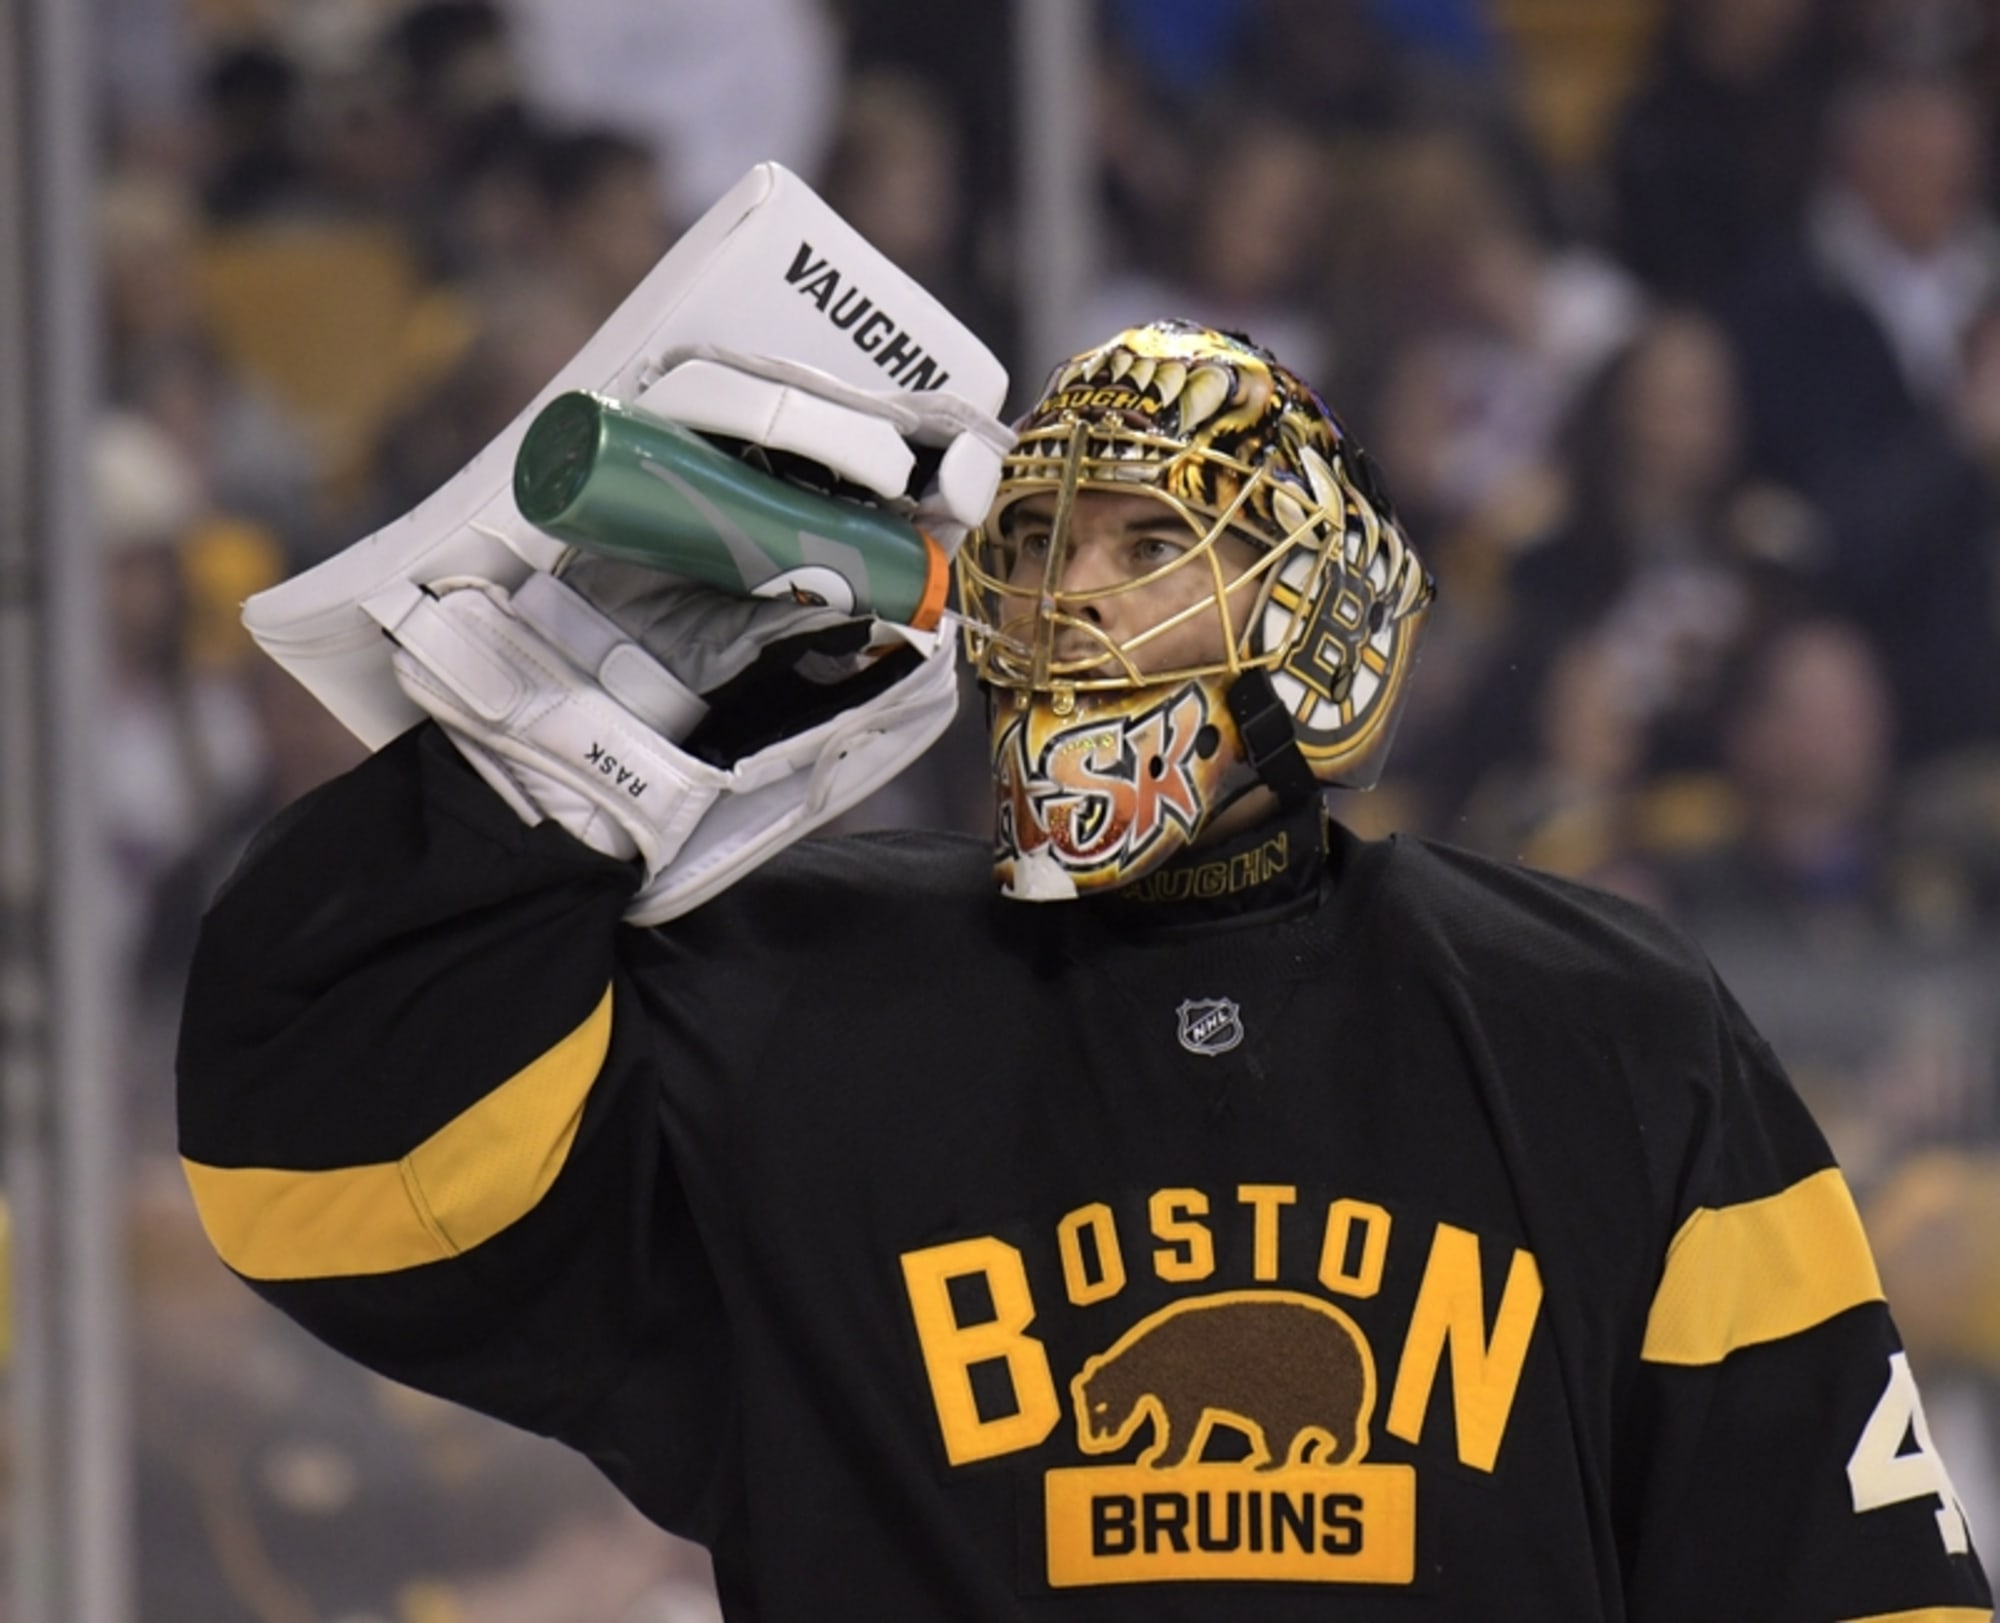 All about Bruins goalie Tuukka Rask with stats and contract info